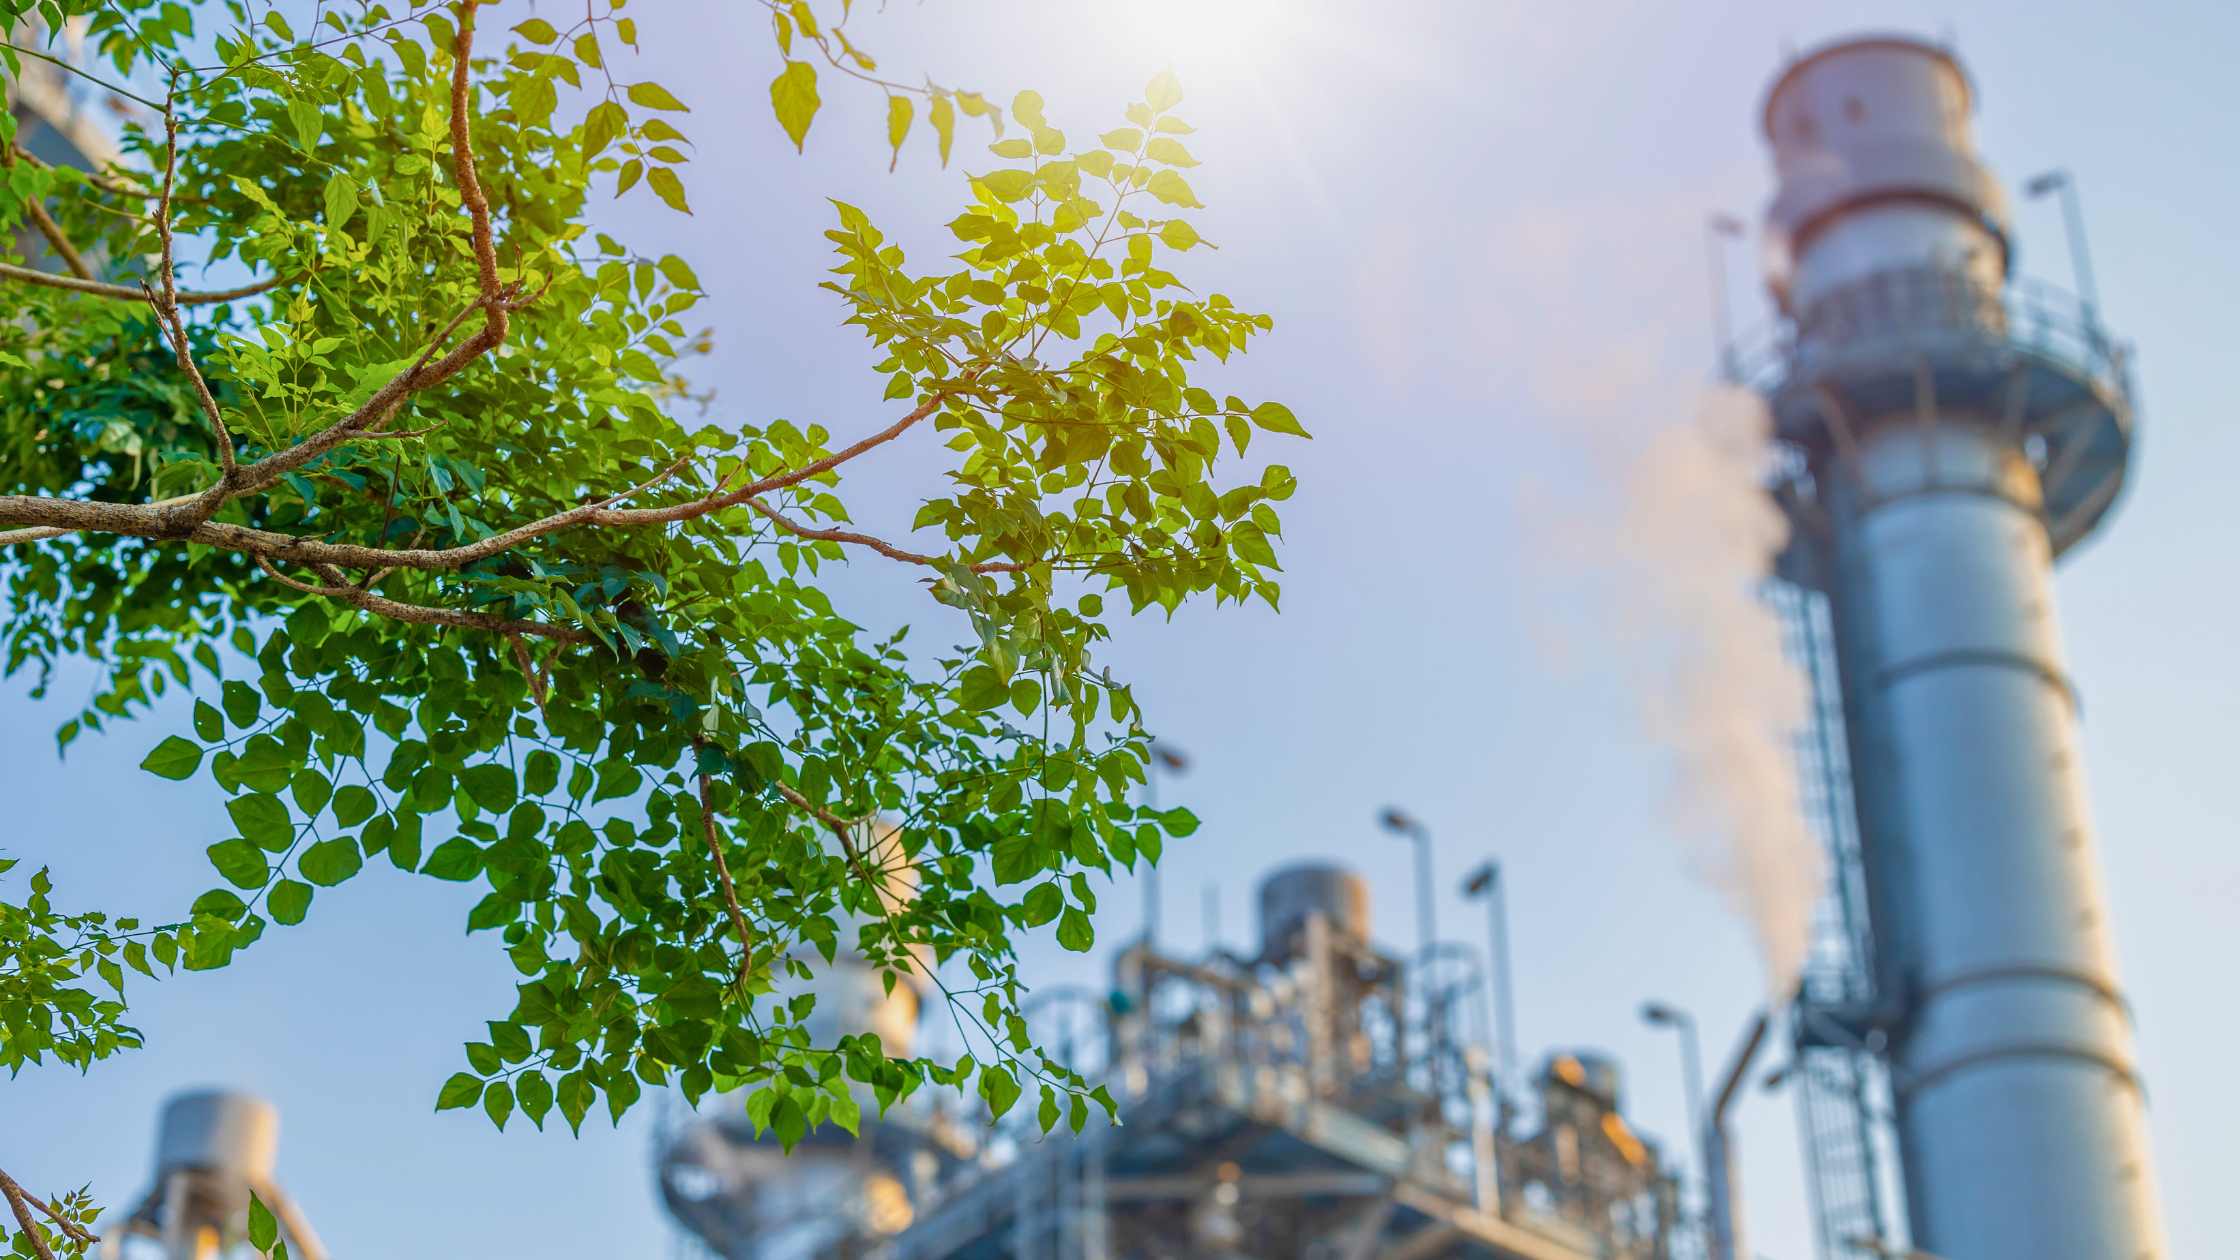 Navigating Environmental Considerations in Industrial Plants | Considerations for both the inside (facility) environment, plus protecting the environment outside